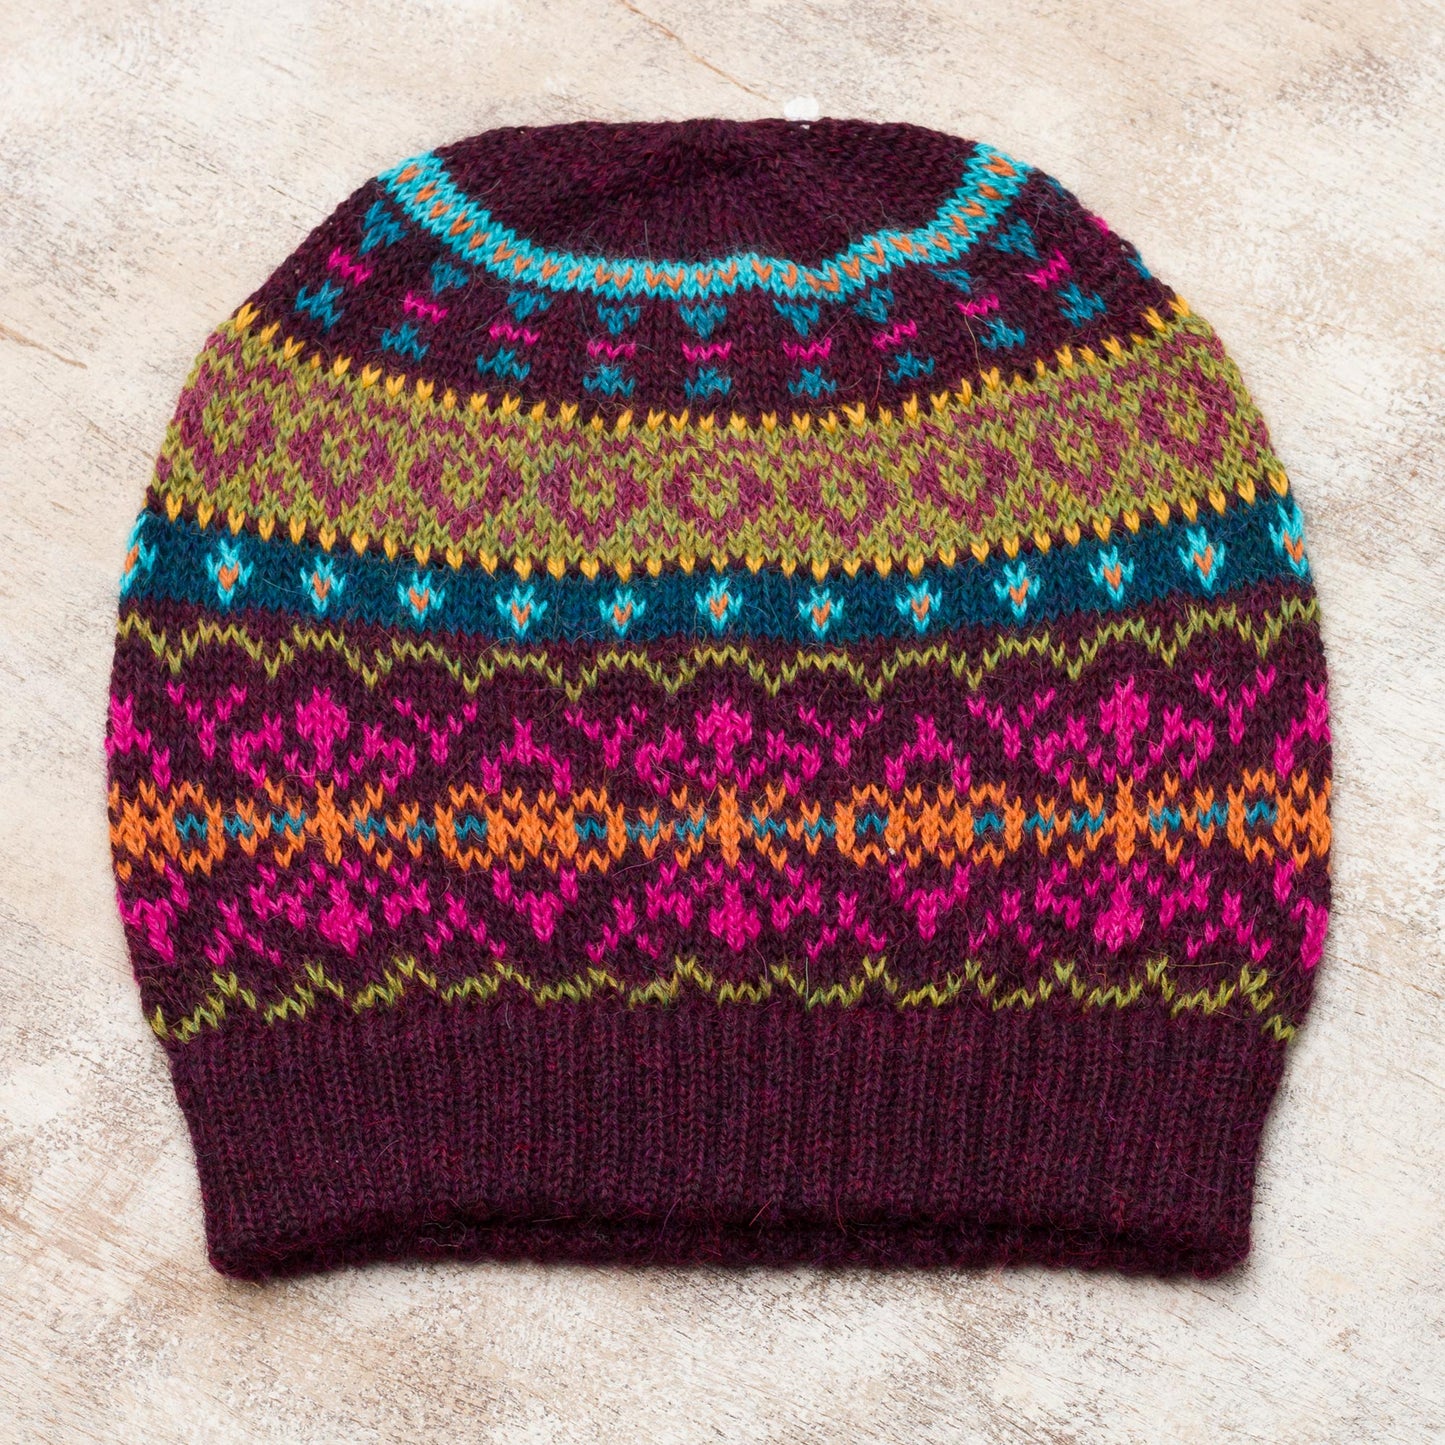 Colorful Carousel Multi-Color 100% Alpaca Knit Hat with Rows of Varying Motifs